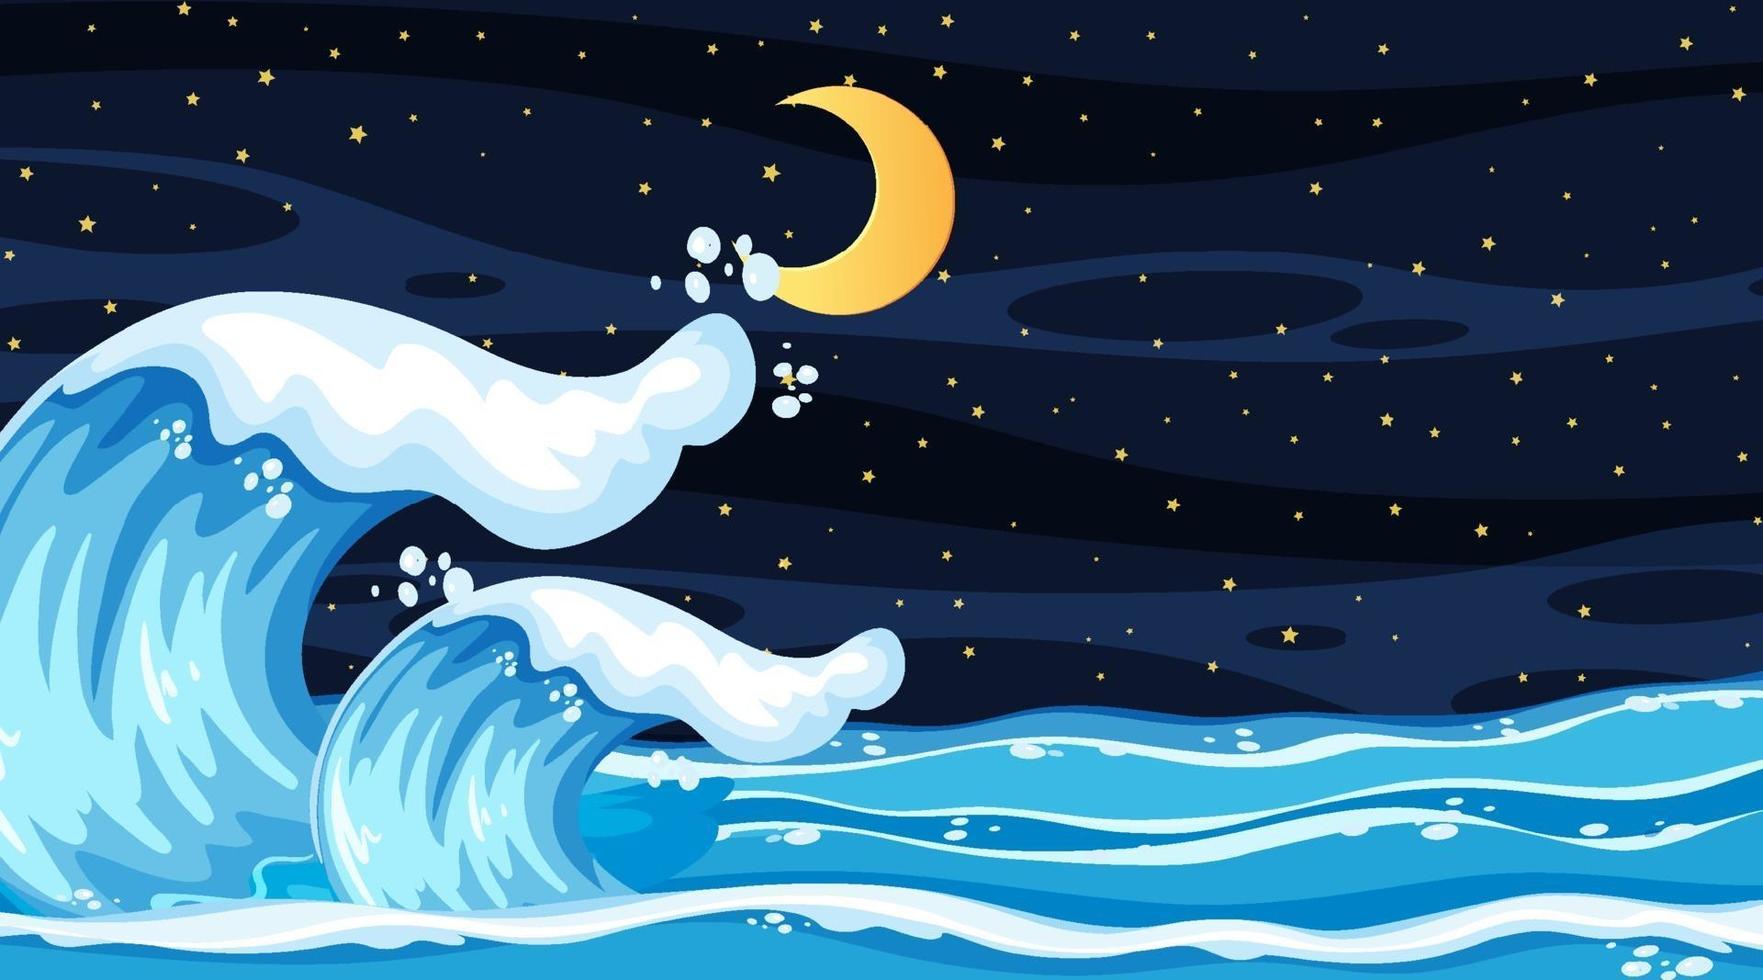 Beach landscape at night scene with ocean wave vector